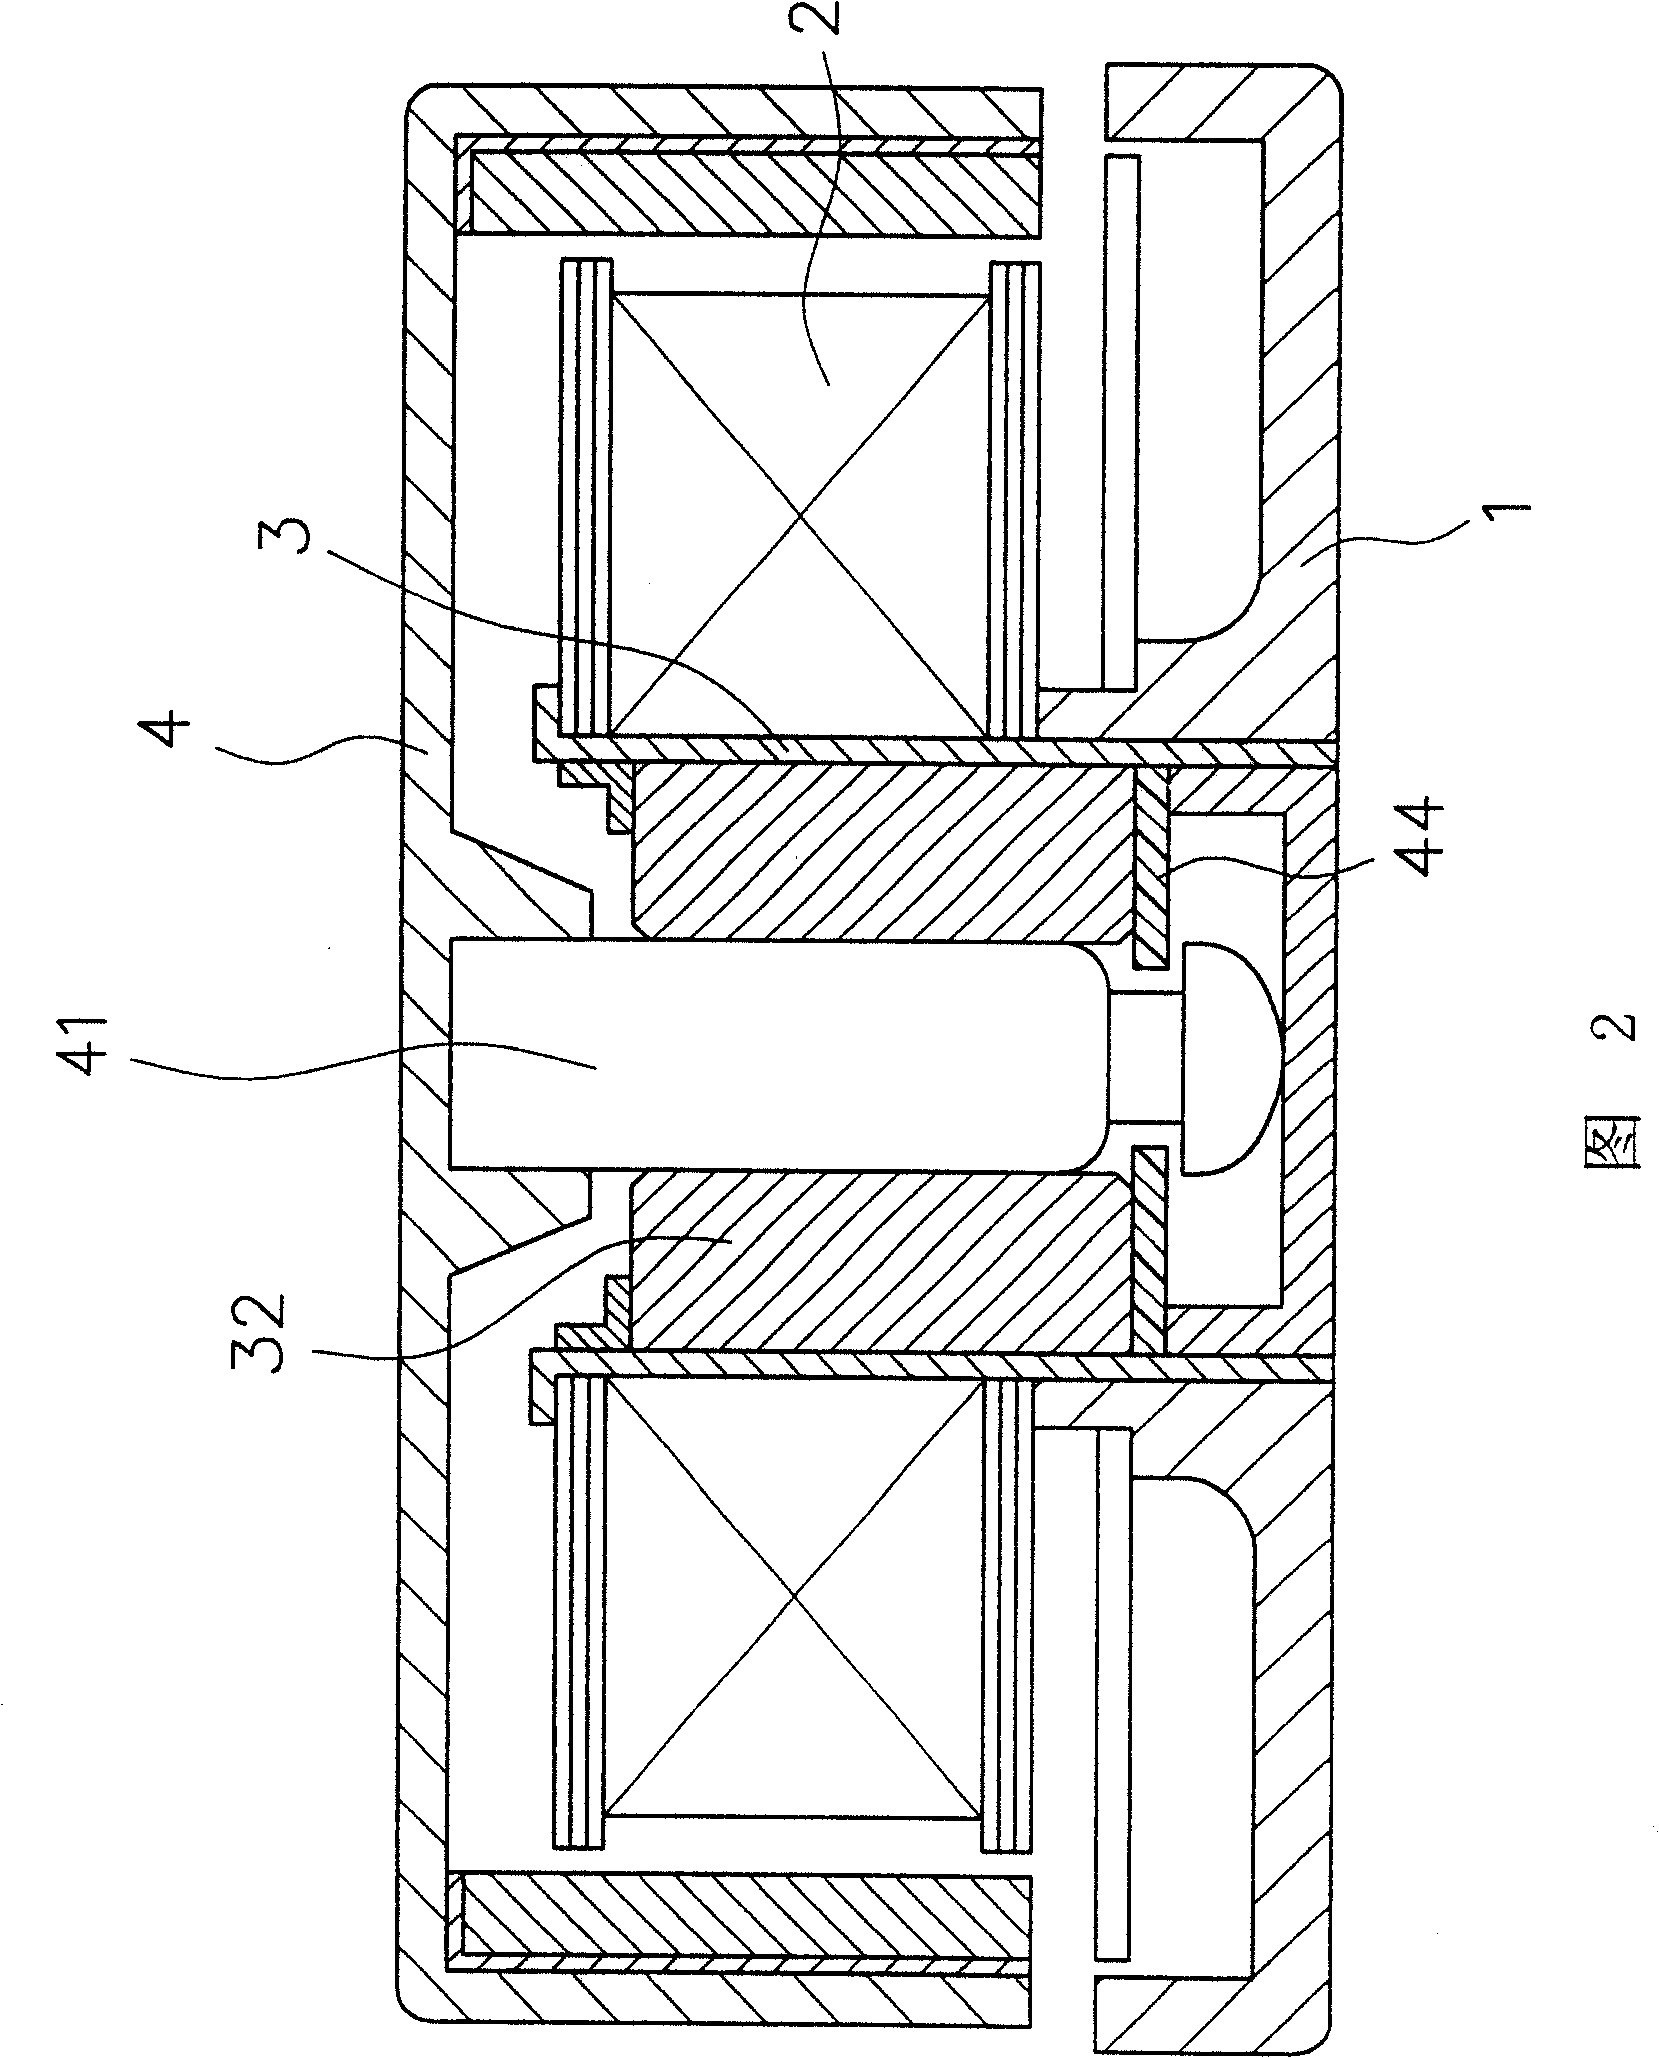 Motor centrally axle coupling structure